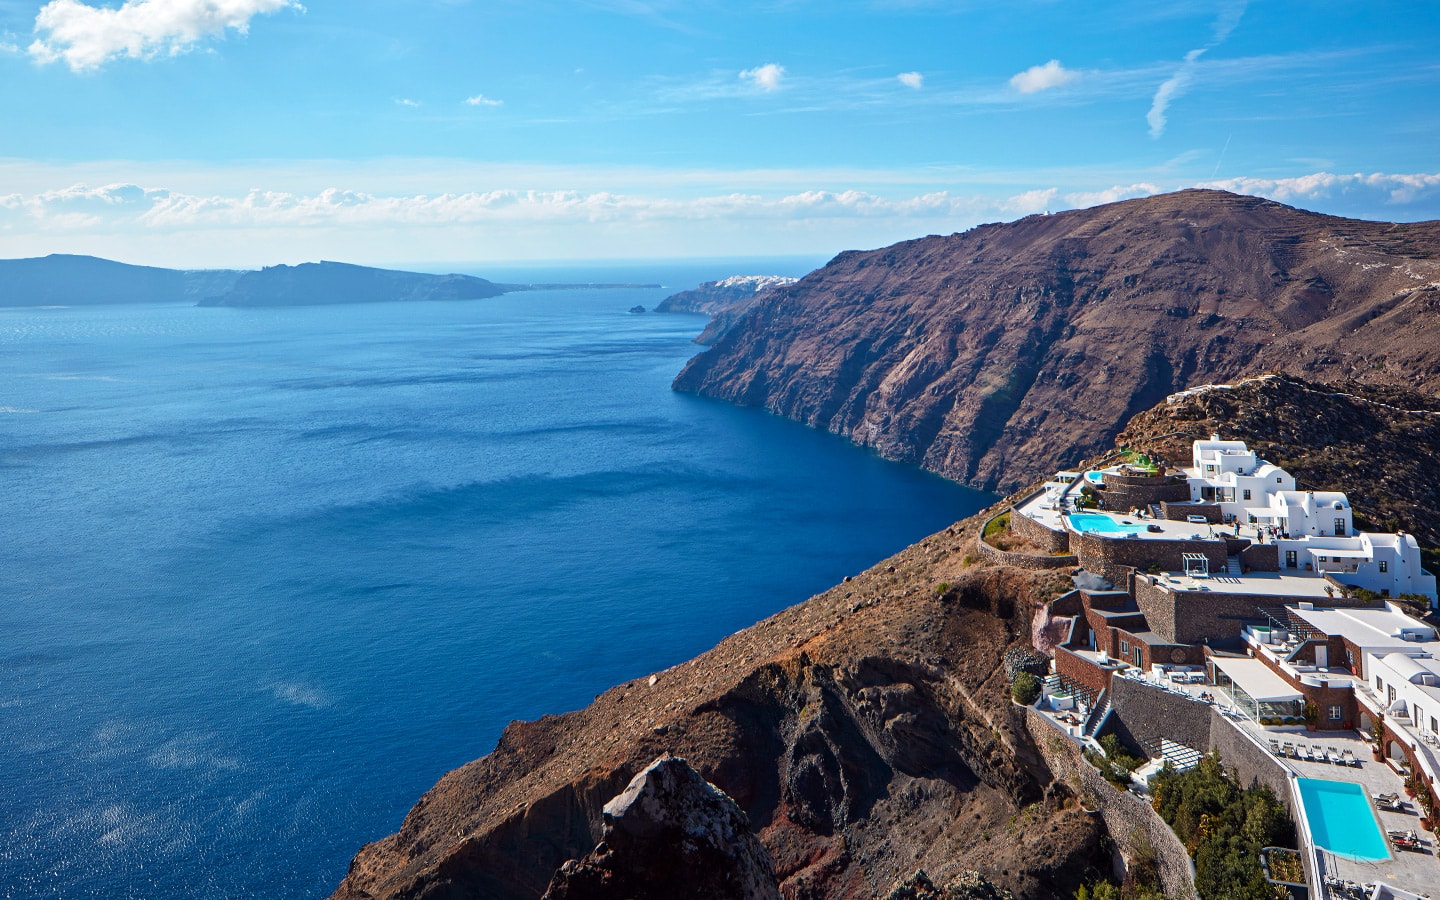  Where to stay when in Santorini island